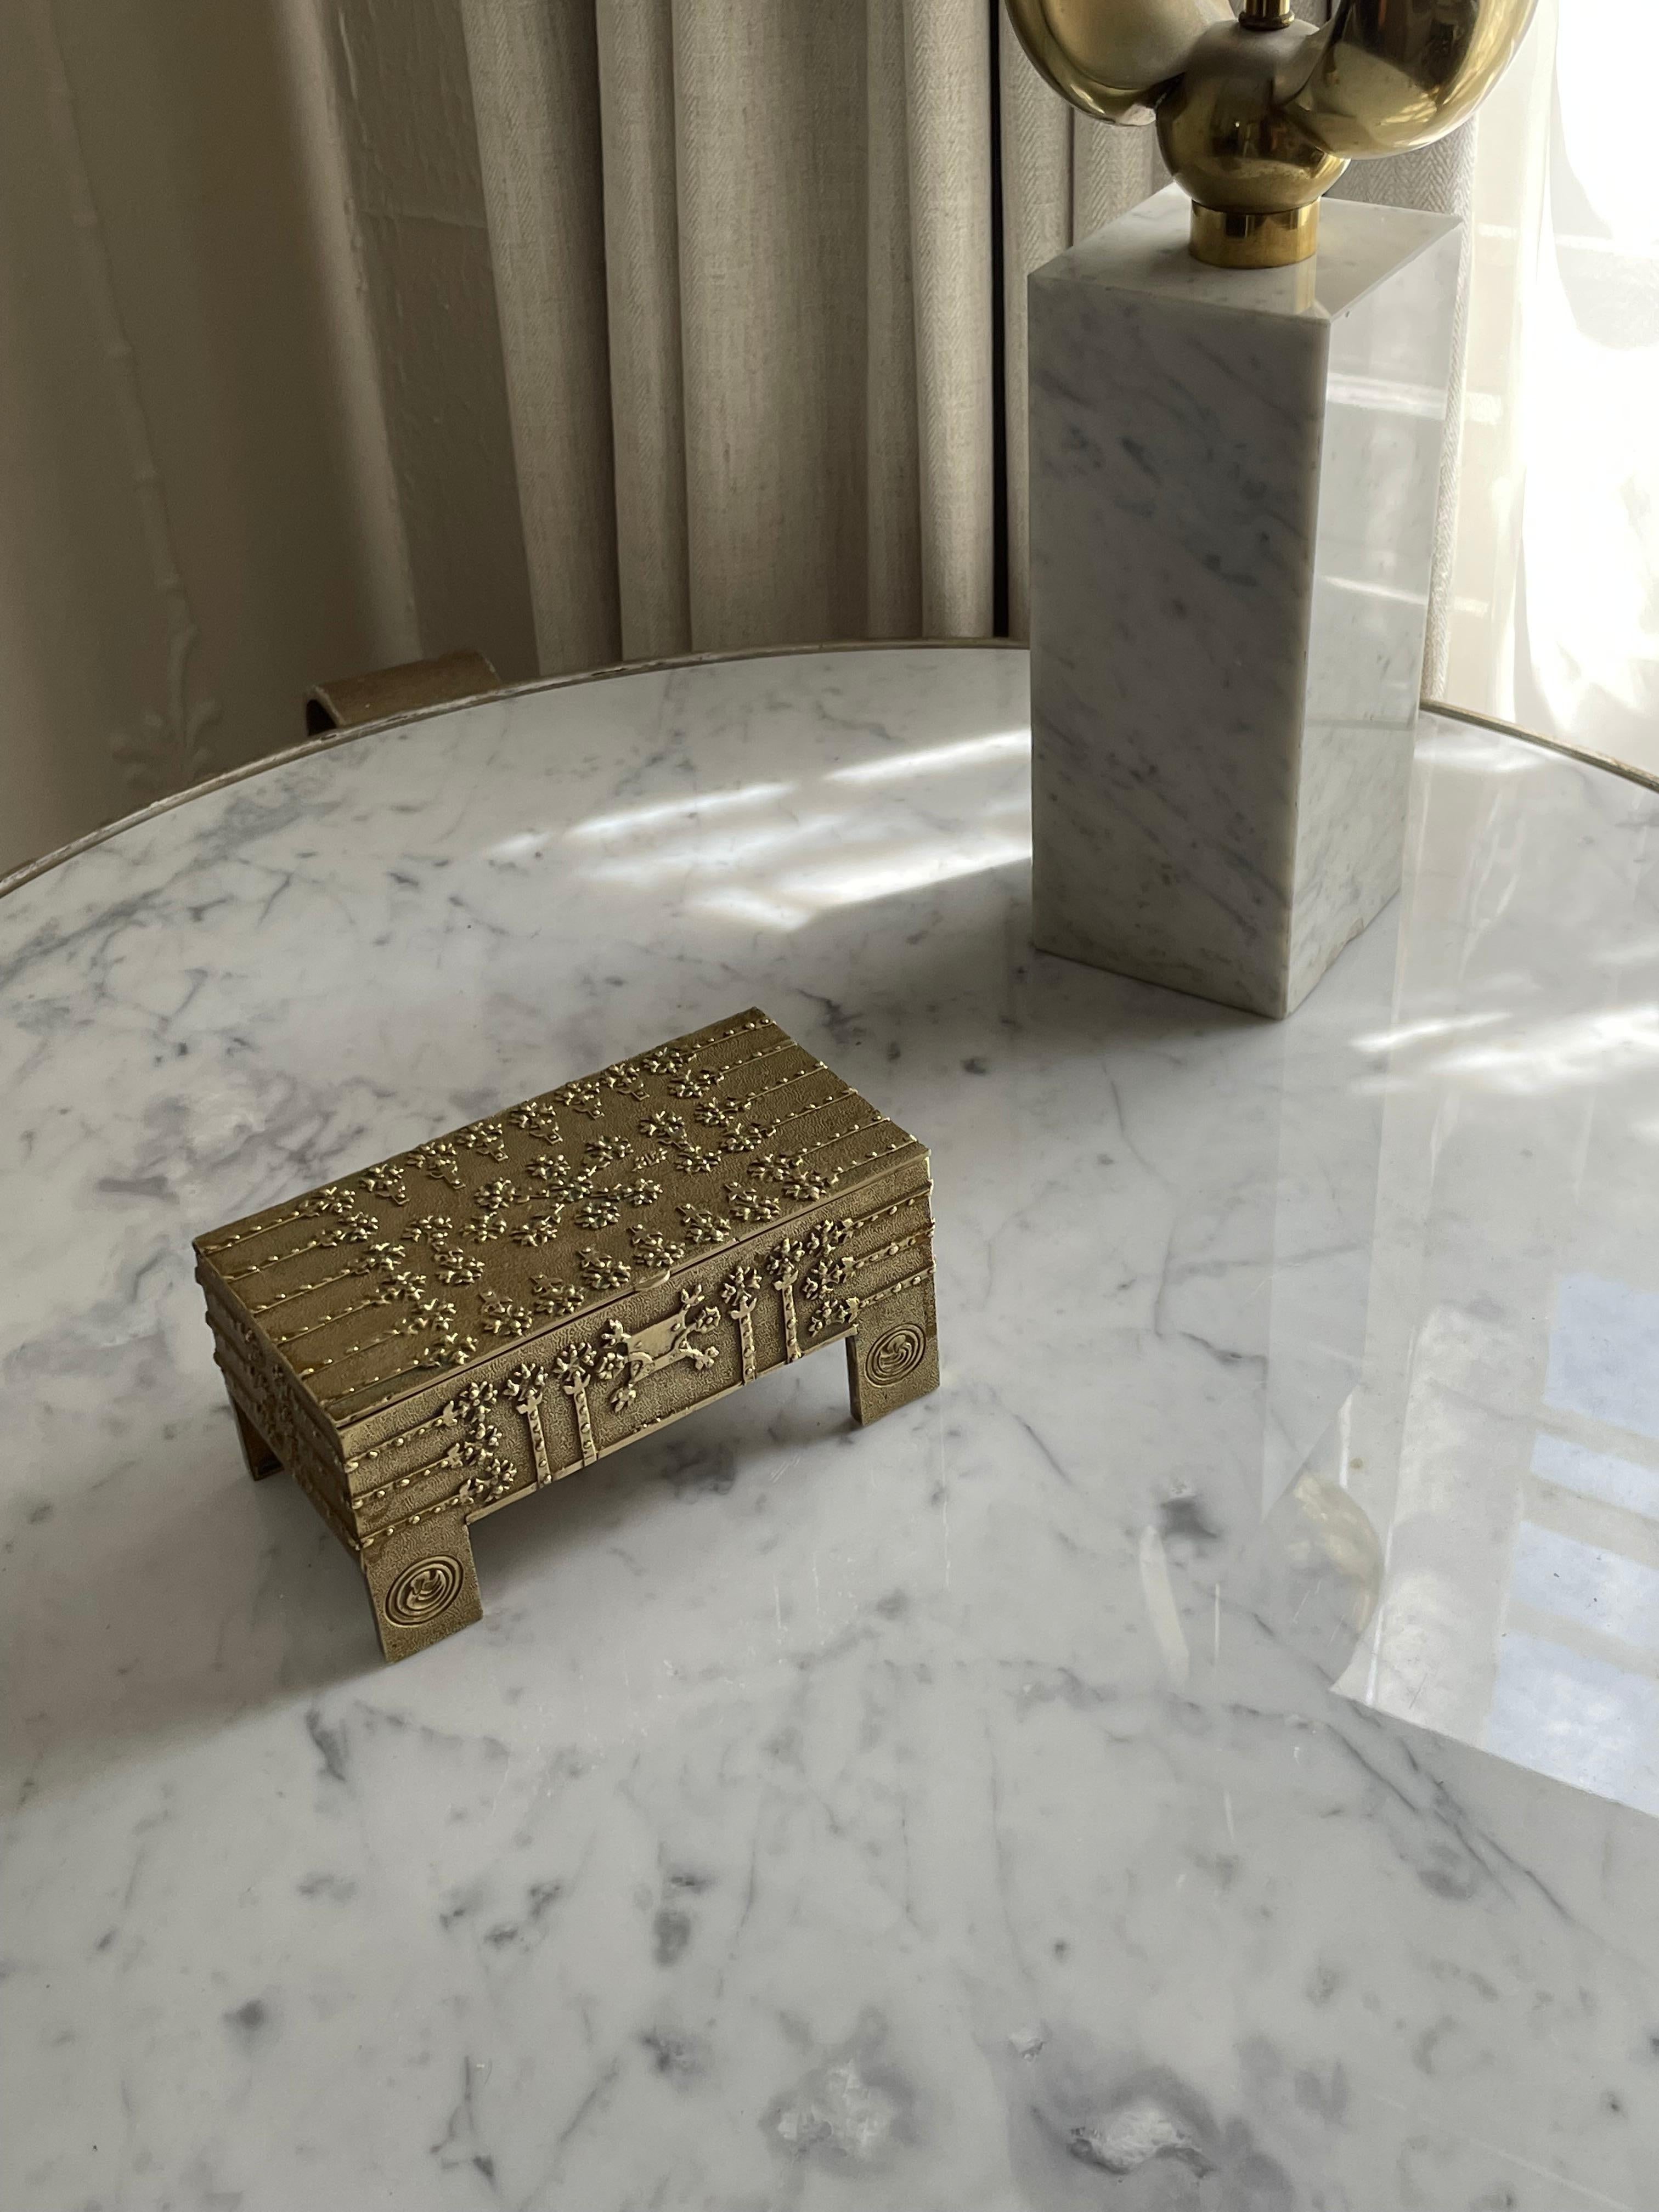 Hand-Crafted Brutalist Hammered Brass Box or Jewelry Casket For Sale